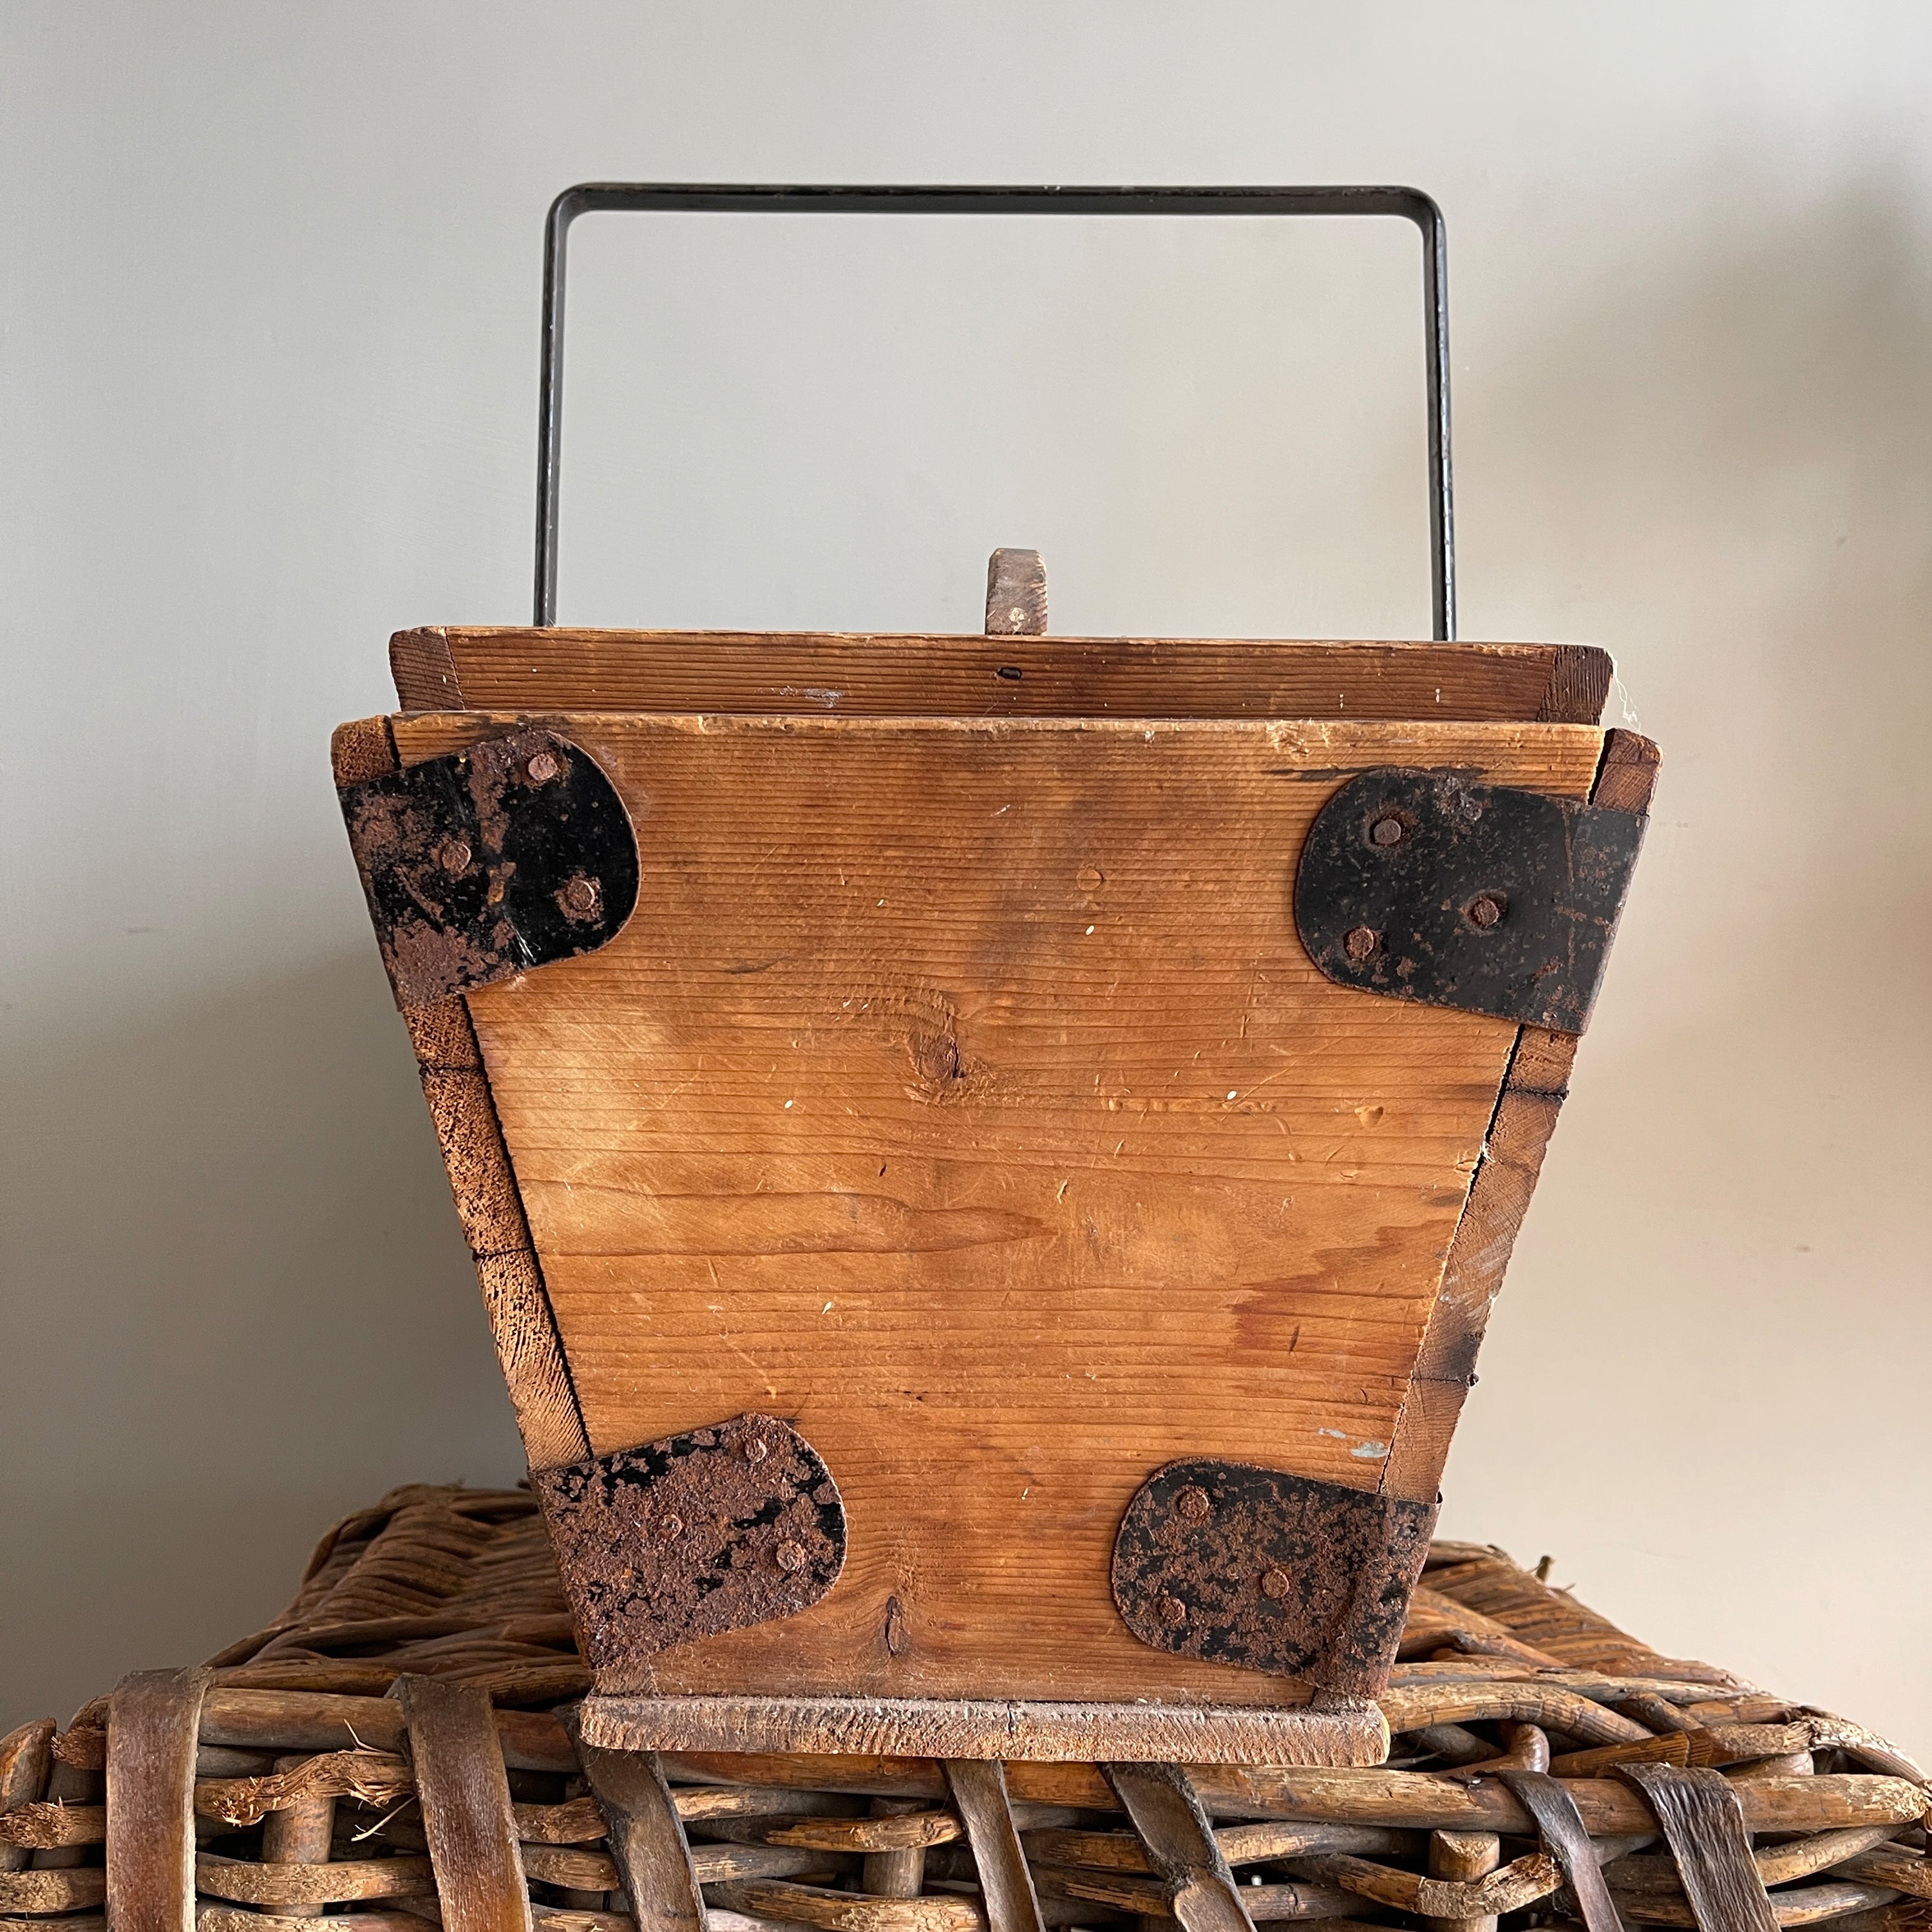 A Period House Maid's Pine Trug with sturdy metal handle and strapping. It has a removable top tray containing 4 compartments and still has the original 'IMPROVED HOUSE MAID'S BOX' label to the front. Good strong sturdy construction - SHOP NOW - www.intovintage.co.uk